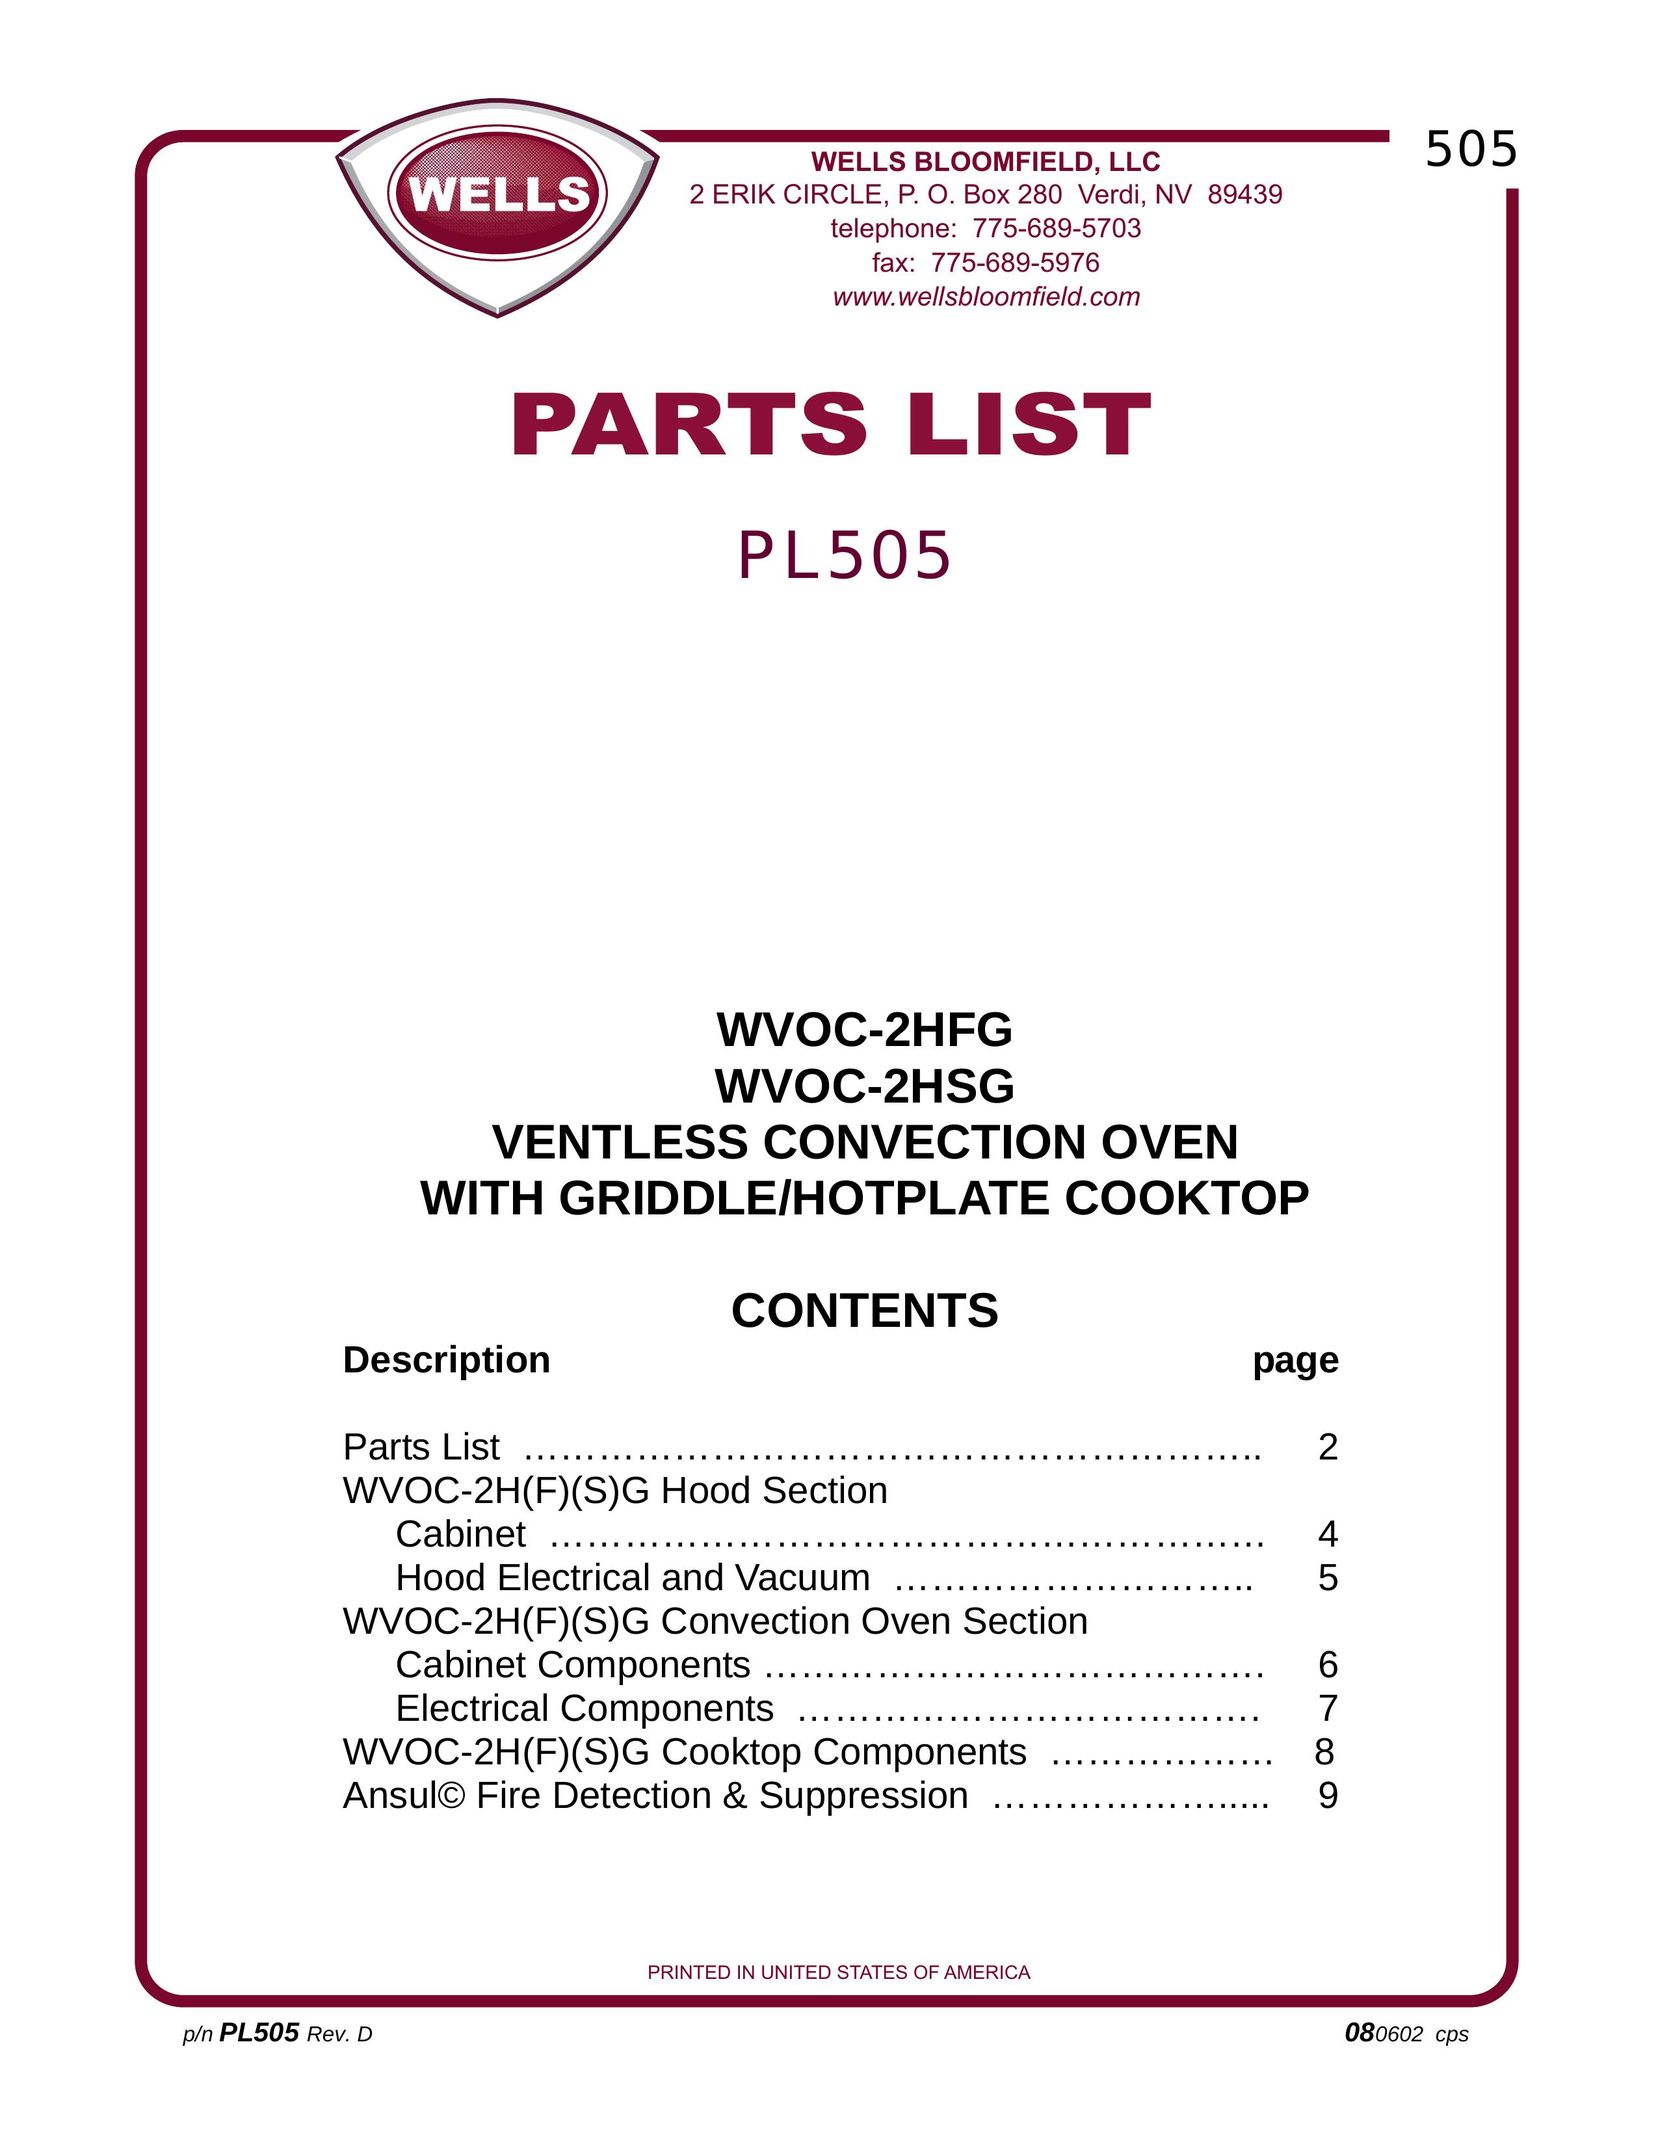 Wells WVOC-2HSG Convection Oven User Manual